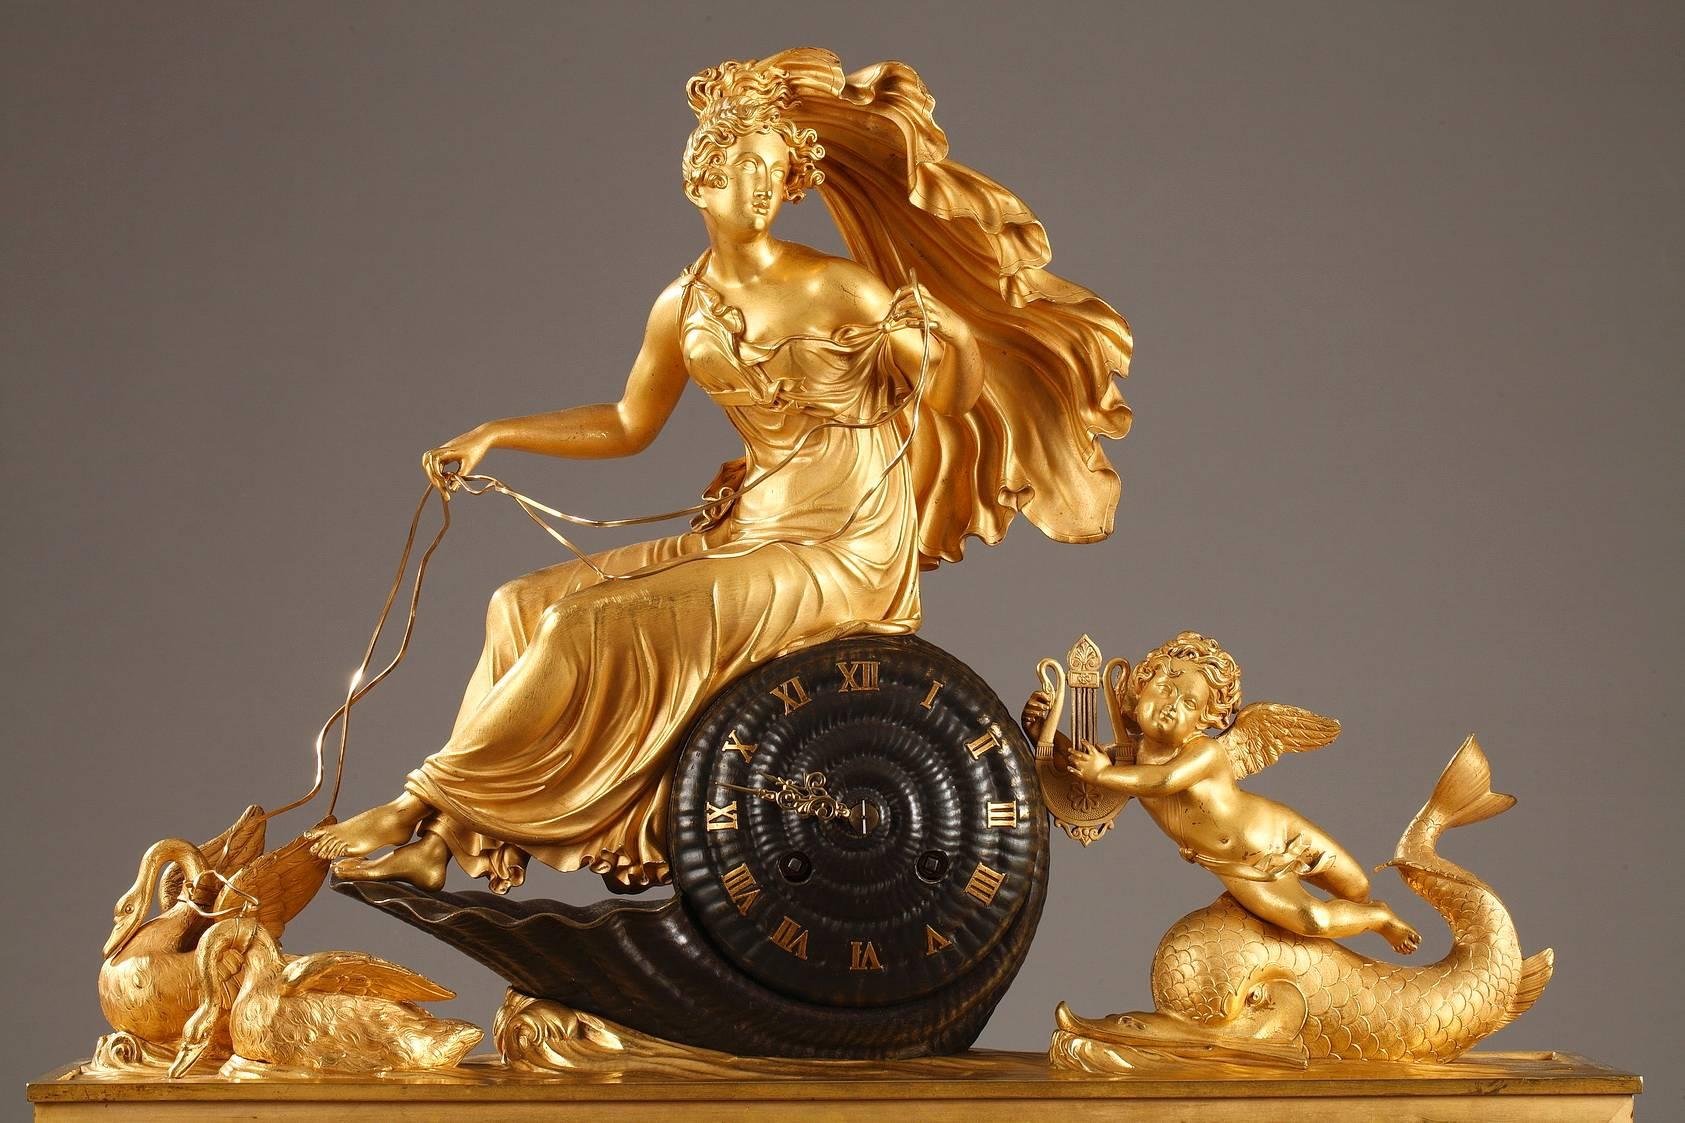 Early 19th century gilt and patinated bronze mantel clock. A young woman is seated on a shell that displays the clock dial, with Roman numerals for hours. Two swans pull the shell and Cupid on a dolphin push it. The set rests on a rectangular base